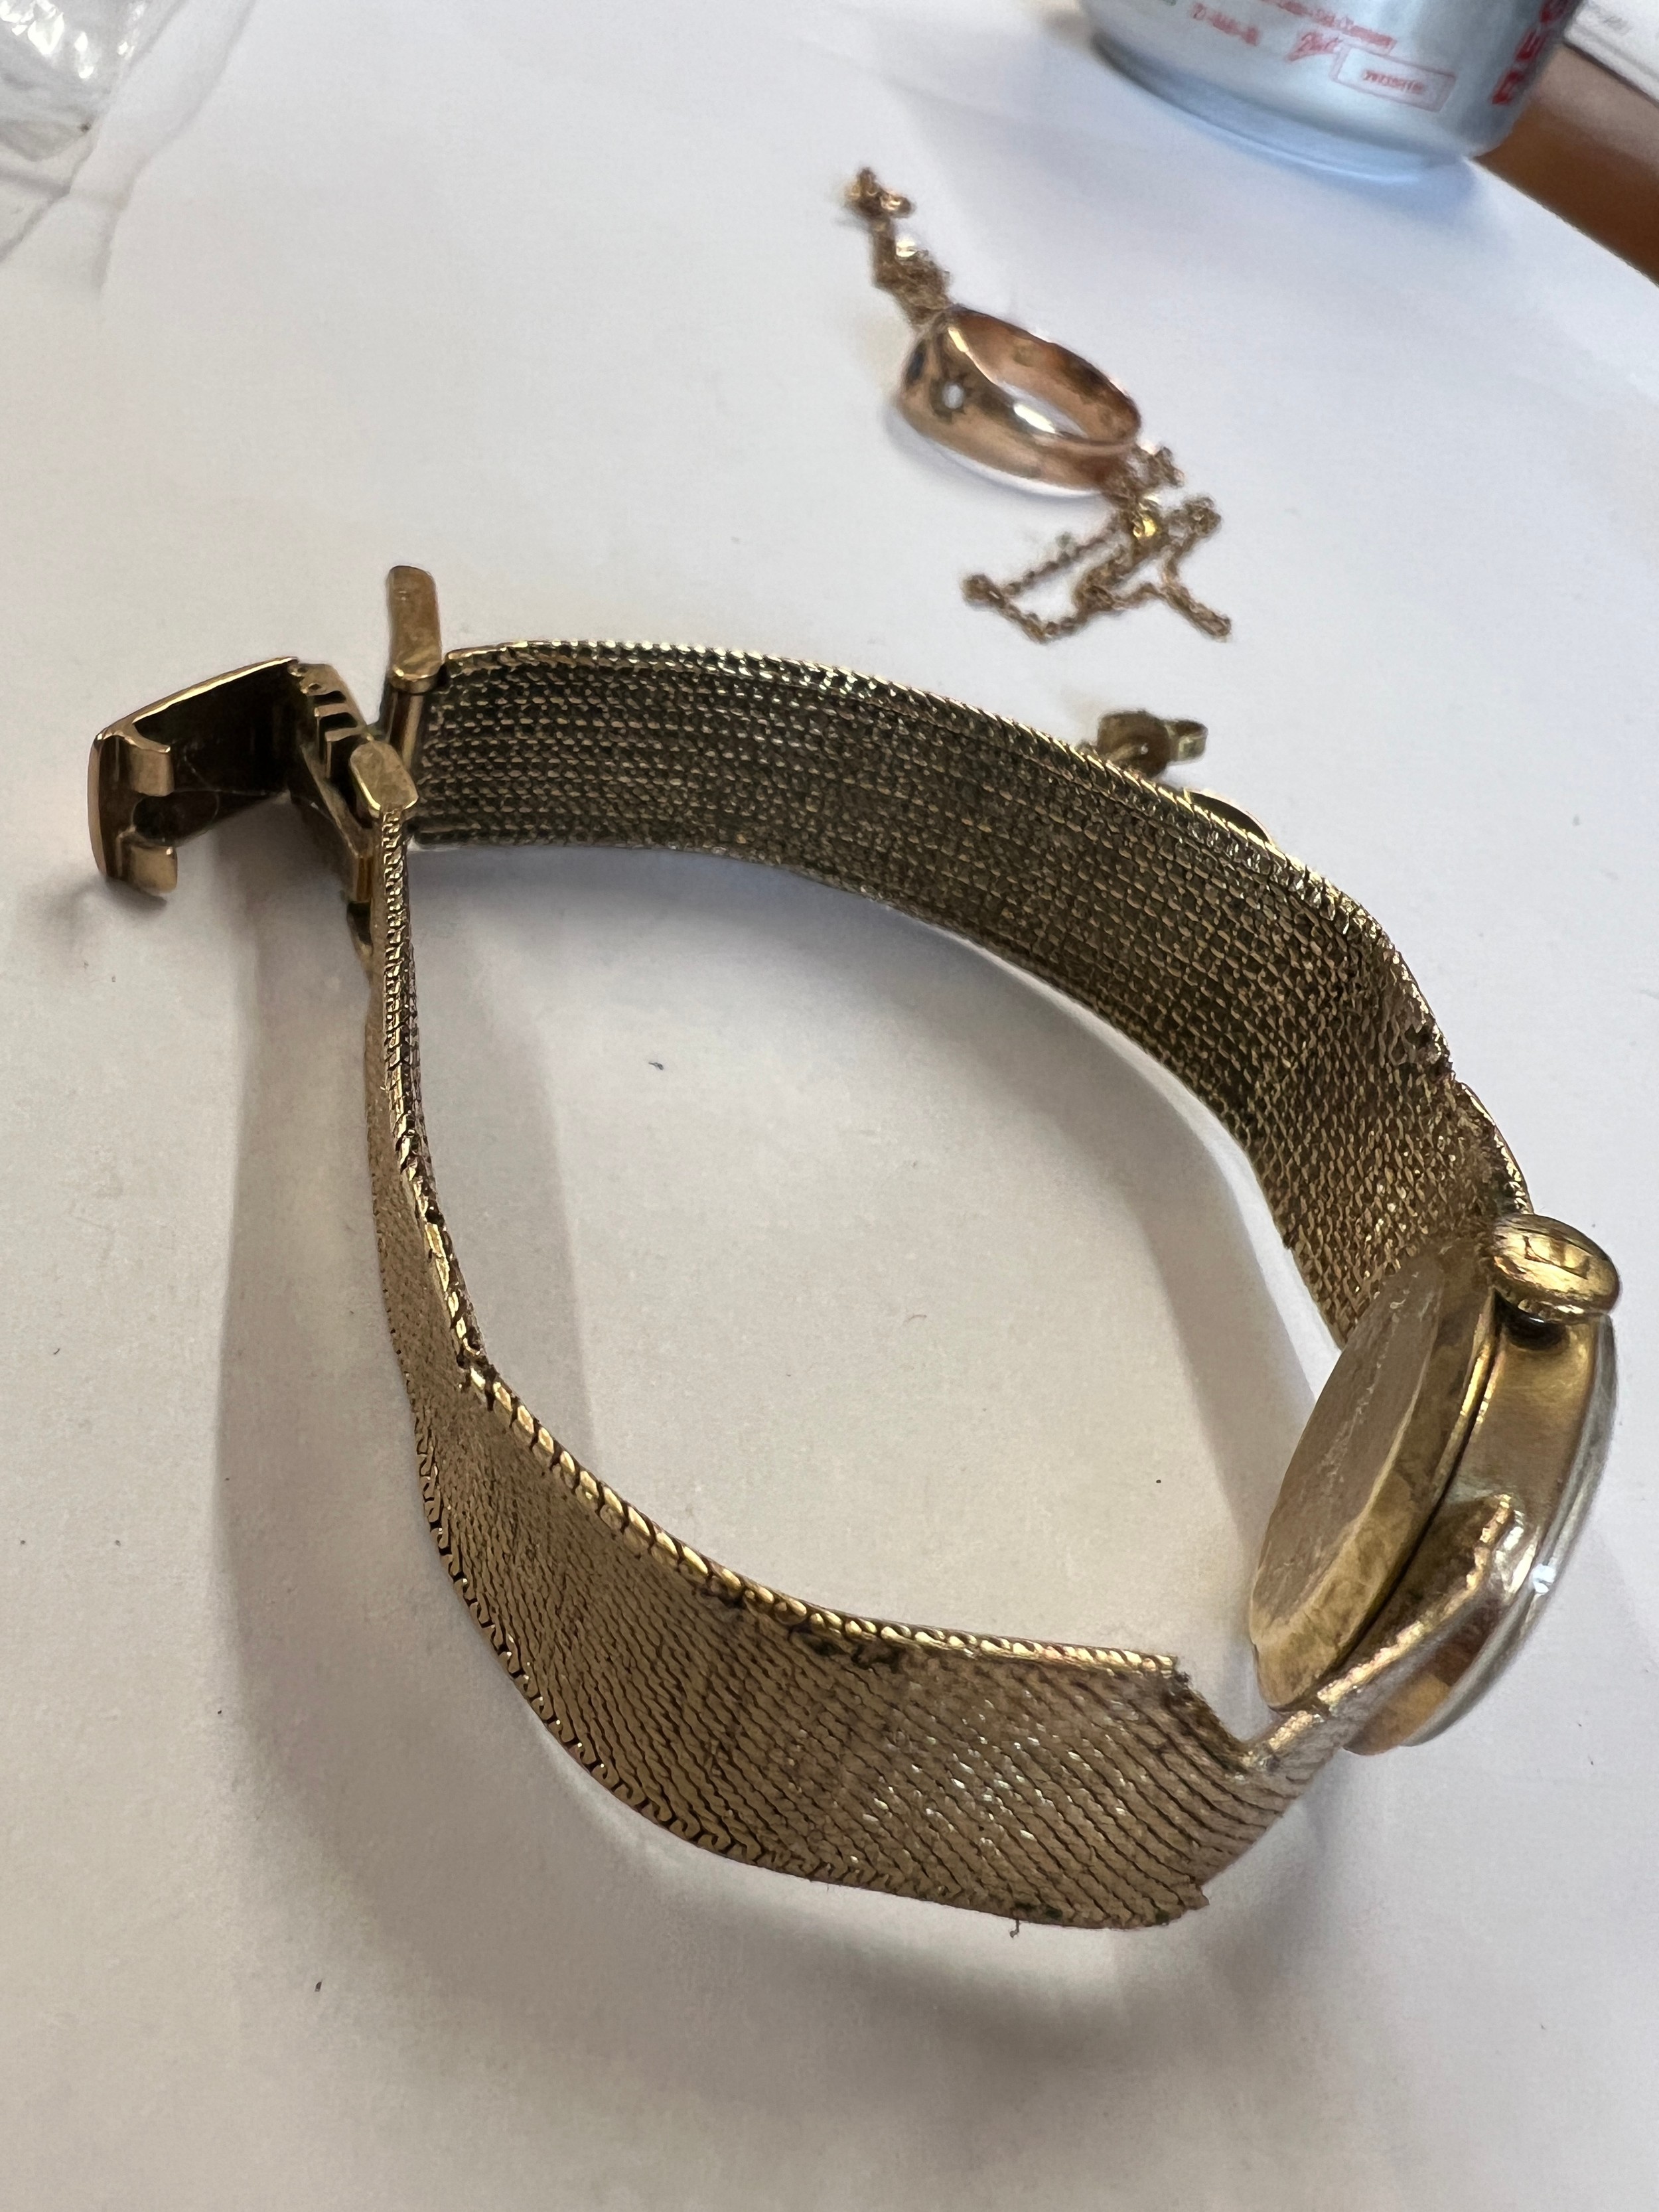 Nine carat gold Tissot watch and strap, gem set ring and unmarked chain and two odd earrings. - Image 3 of 3